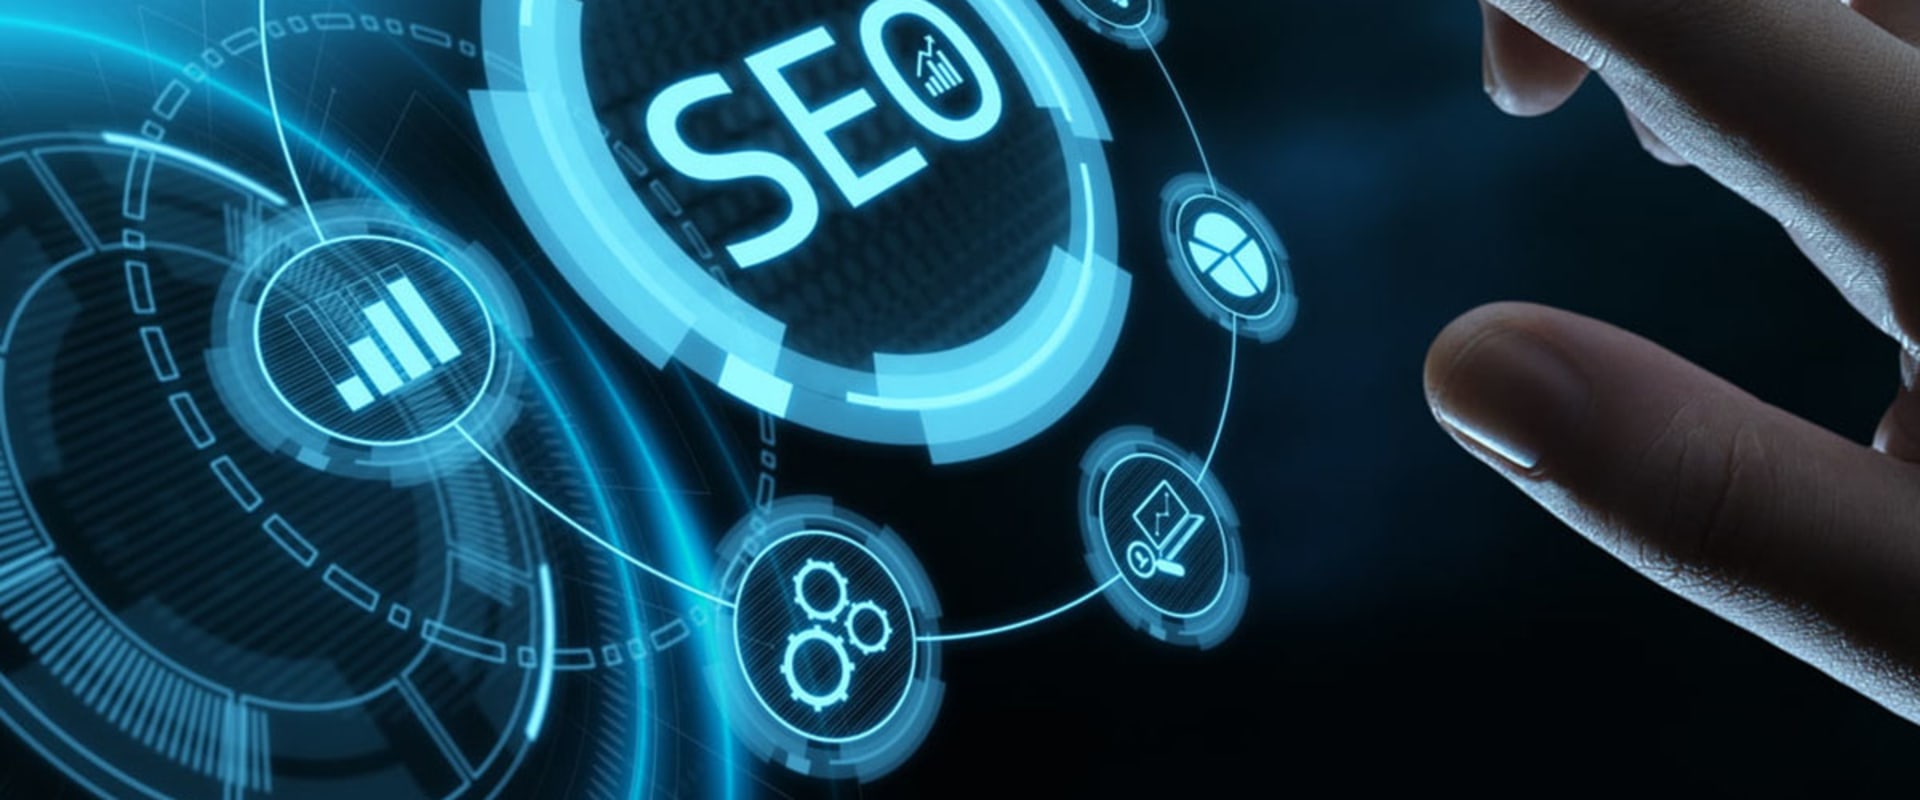 What is a seo and how it works?